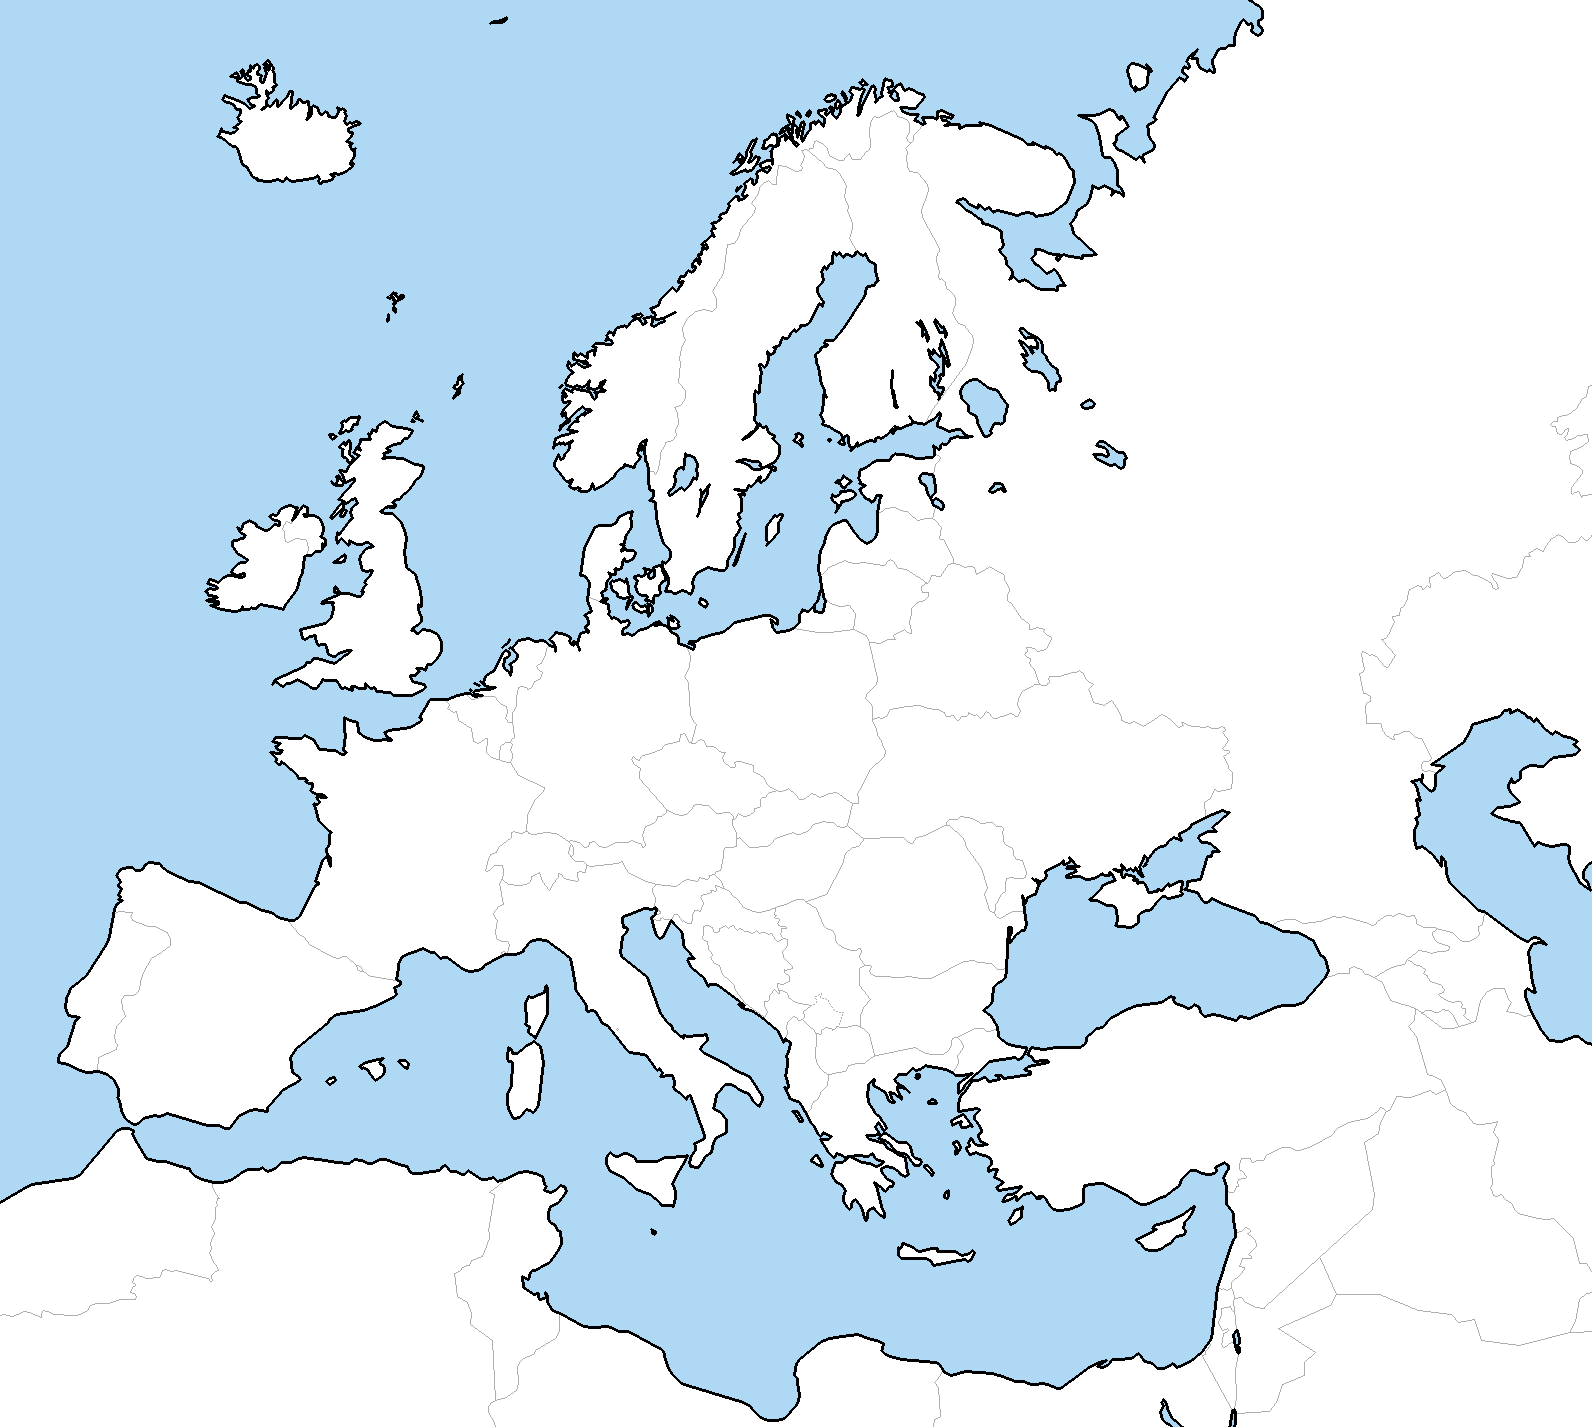 Blank Europe map by Neethis on DeviantArt